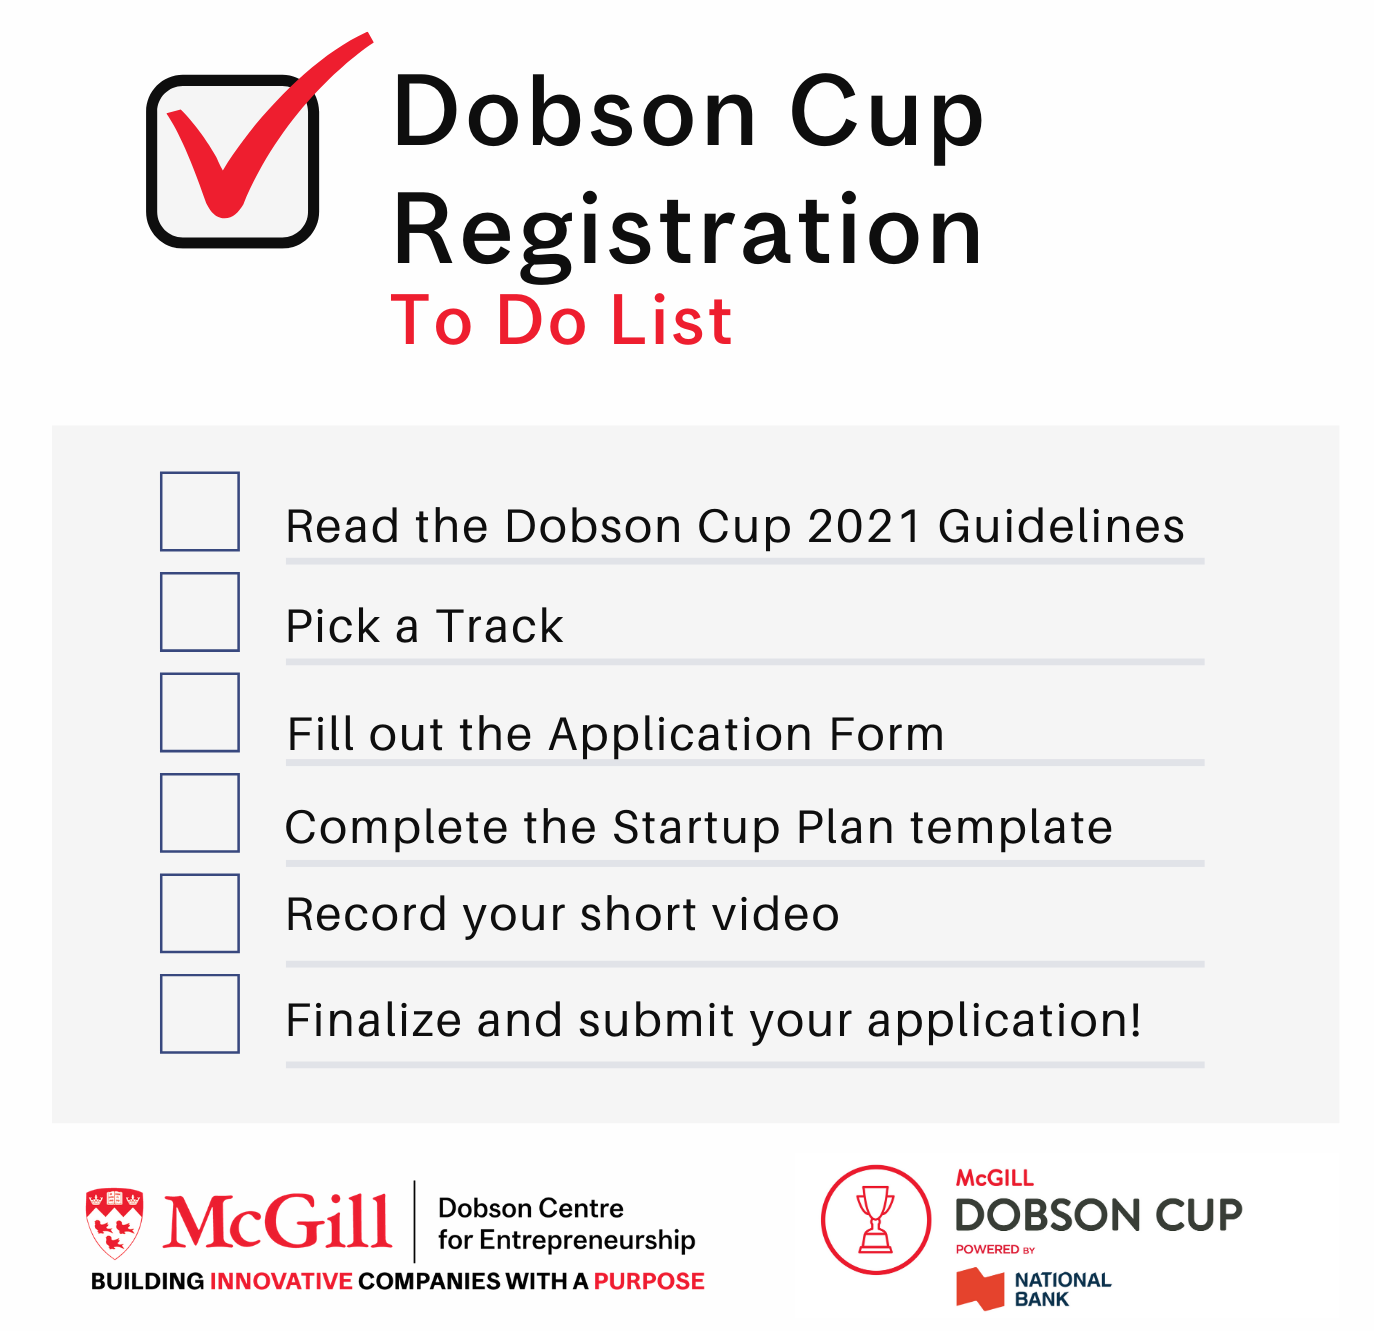 Dobson Cup application to do list